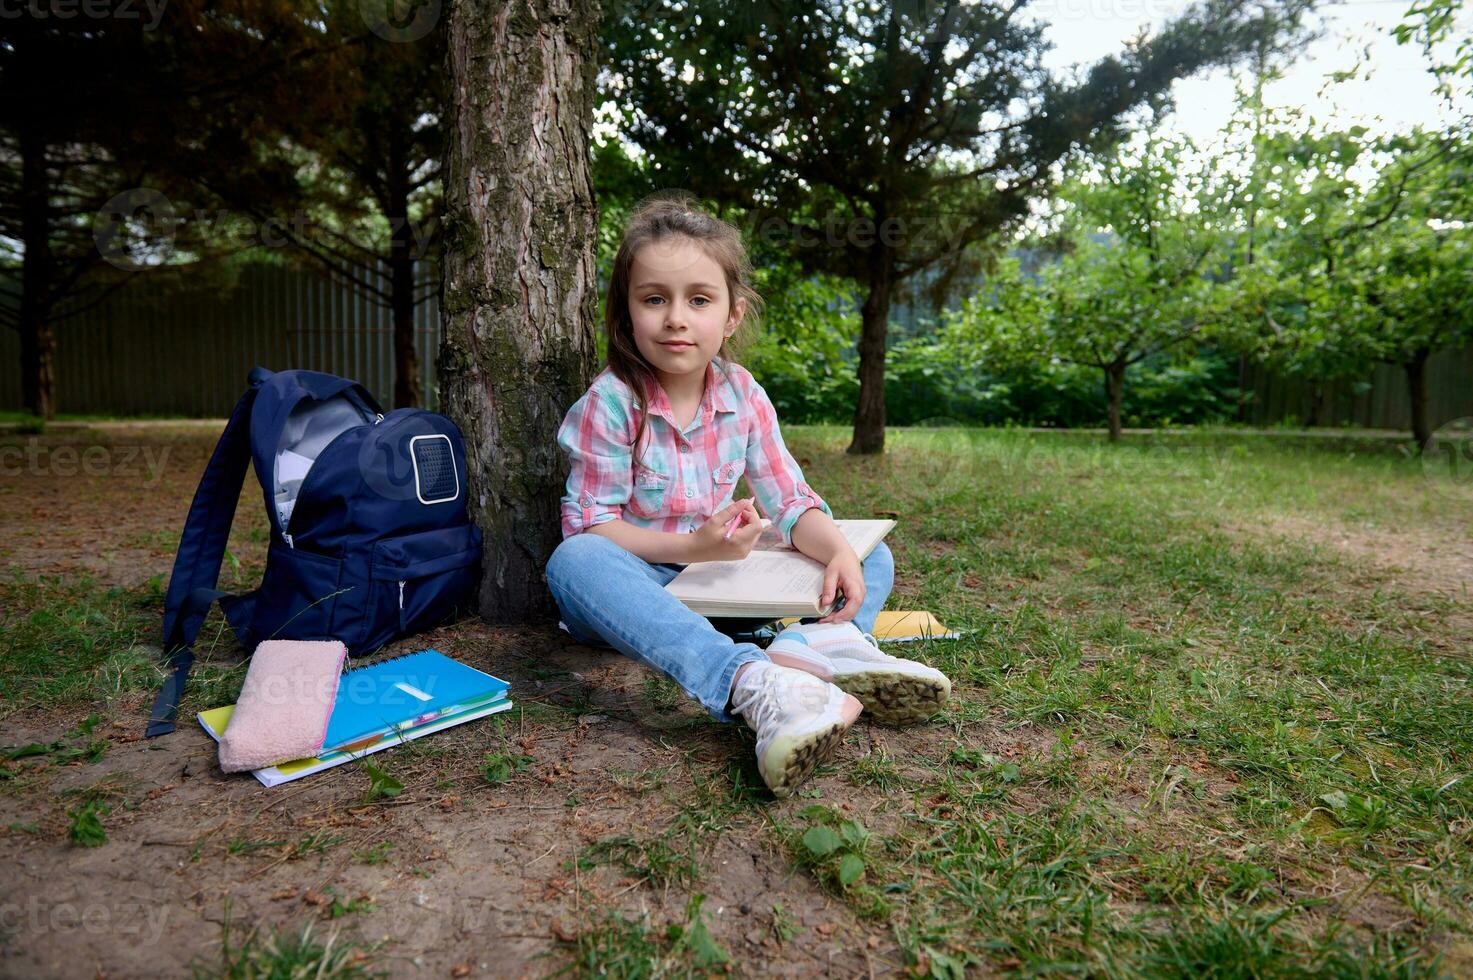 https://static.vecteezy.com/system/resources/previews/027/051/338/non_2x/full-length-portrait-smart-school-girl-6-years-old-smiles-looking-at-camera-sitting-on-green-grass-and-doing-homework-photo.jpg